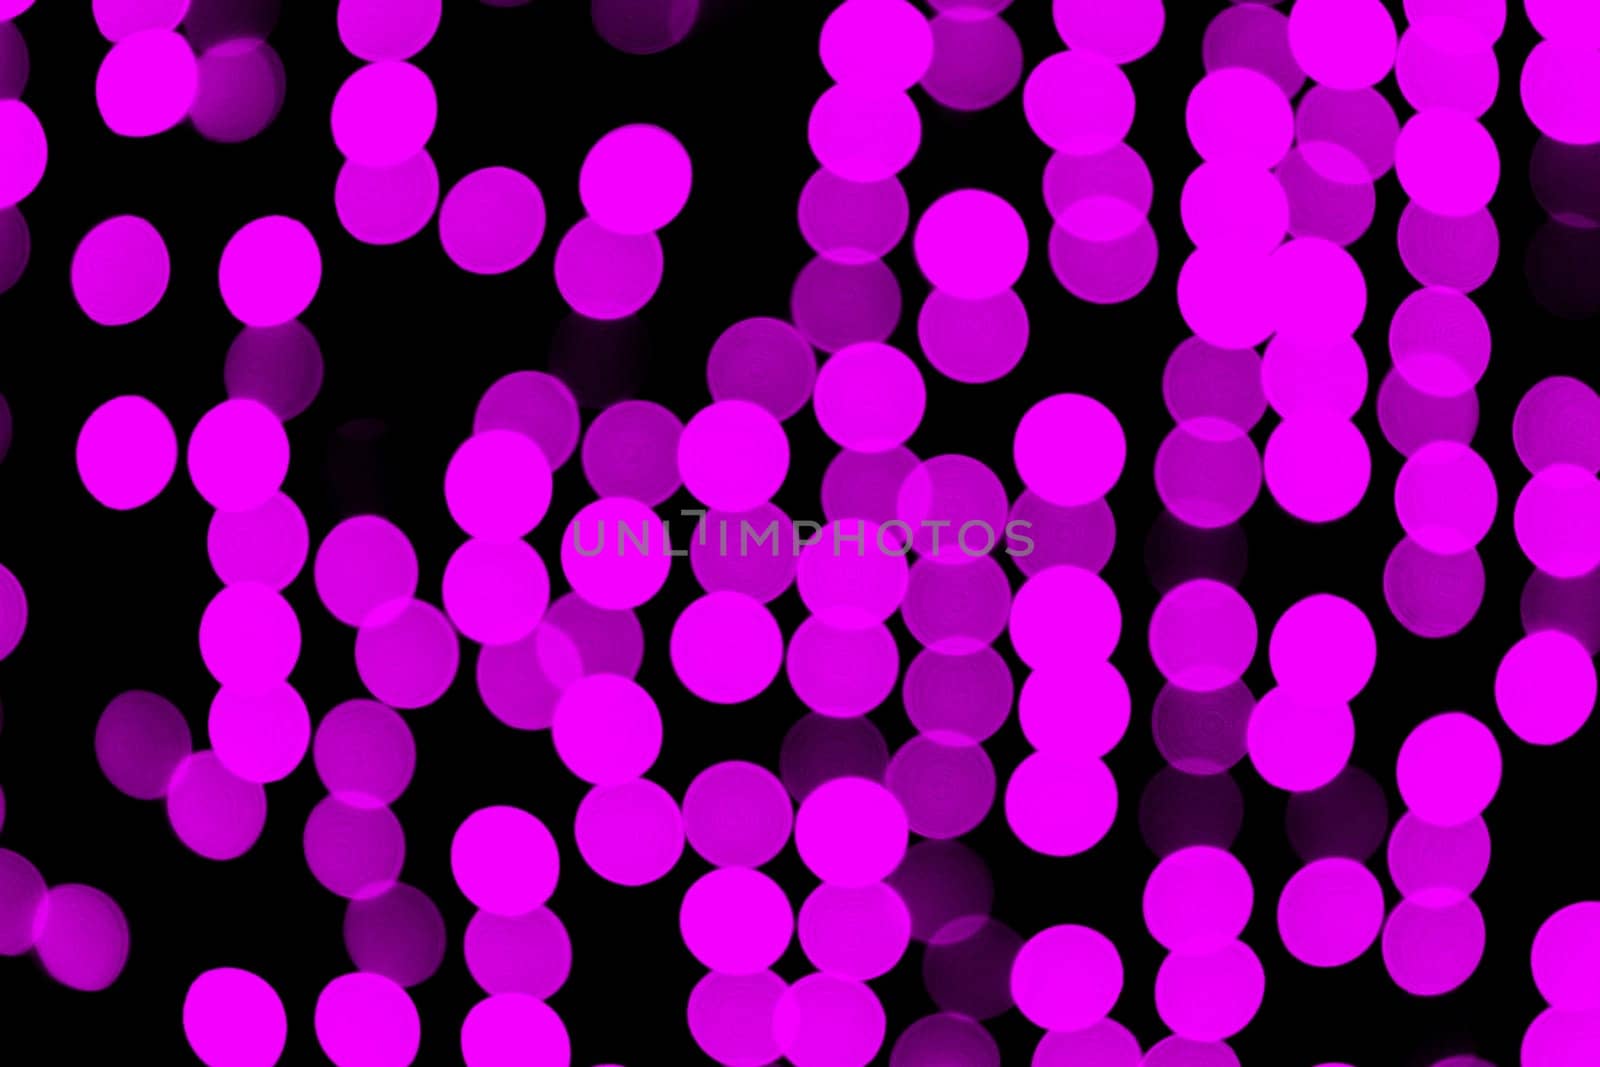 Unfocused abstract pink bokeh on black background. defocused and blurred many round light by Snegok1967